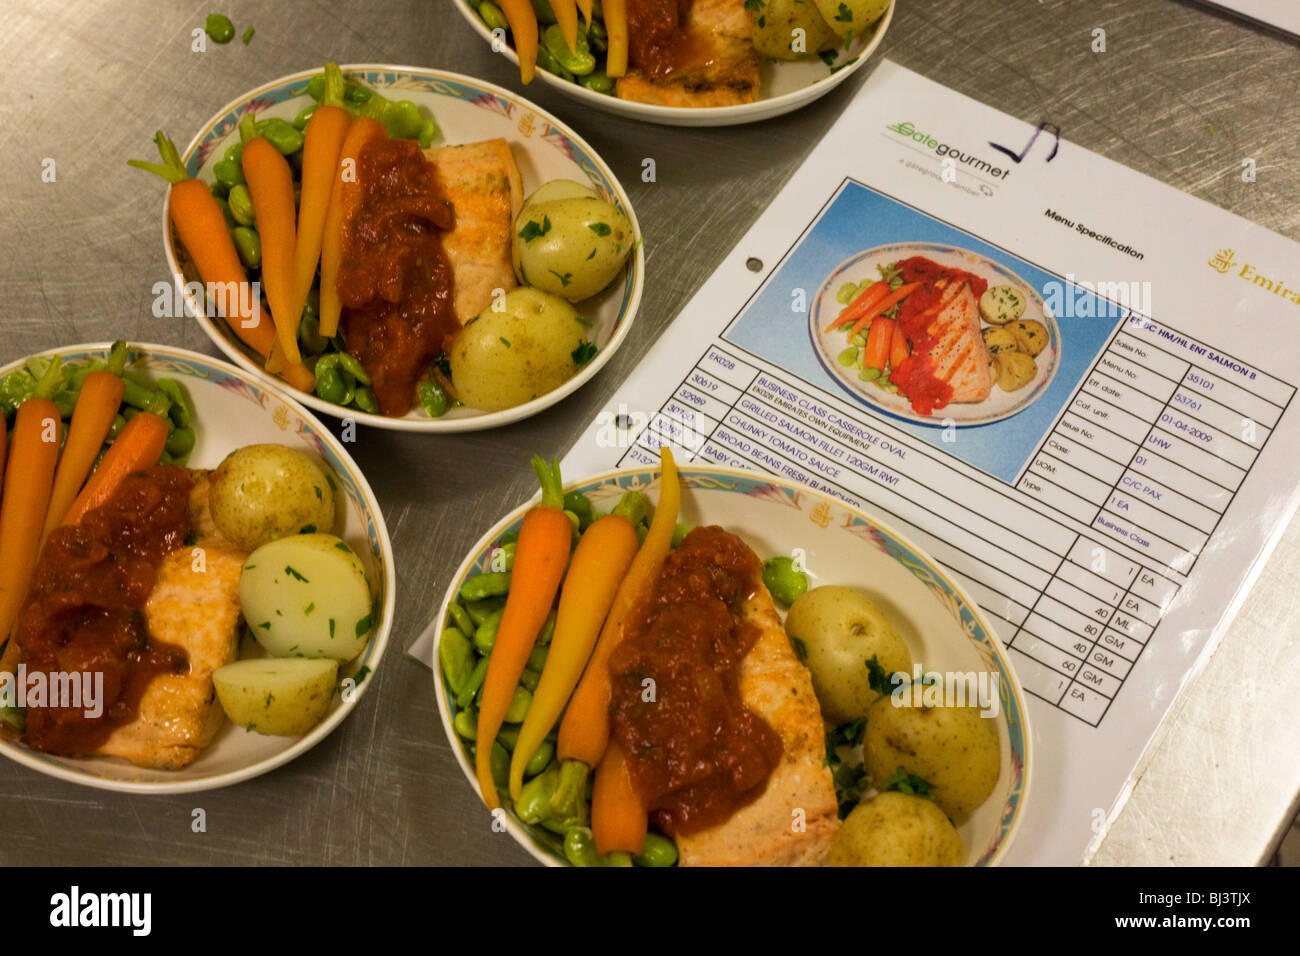 Business Class in-flight airline salmon meal are compared next to finished dishes in airline meal provider. Stock Photo